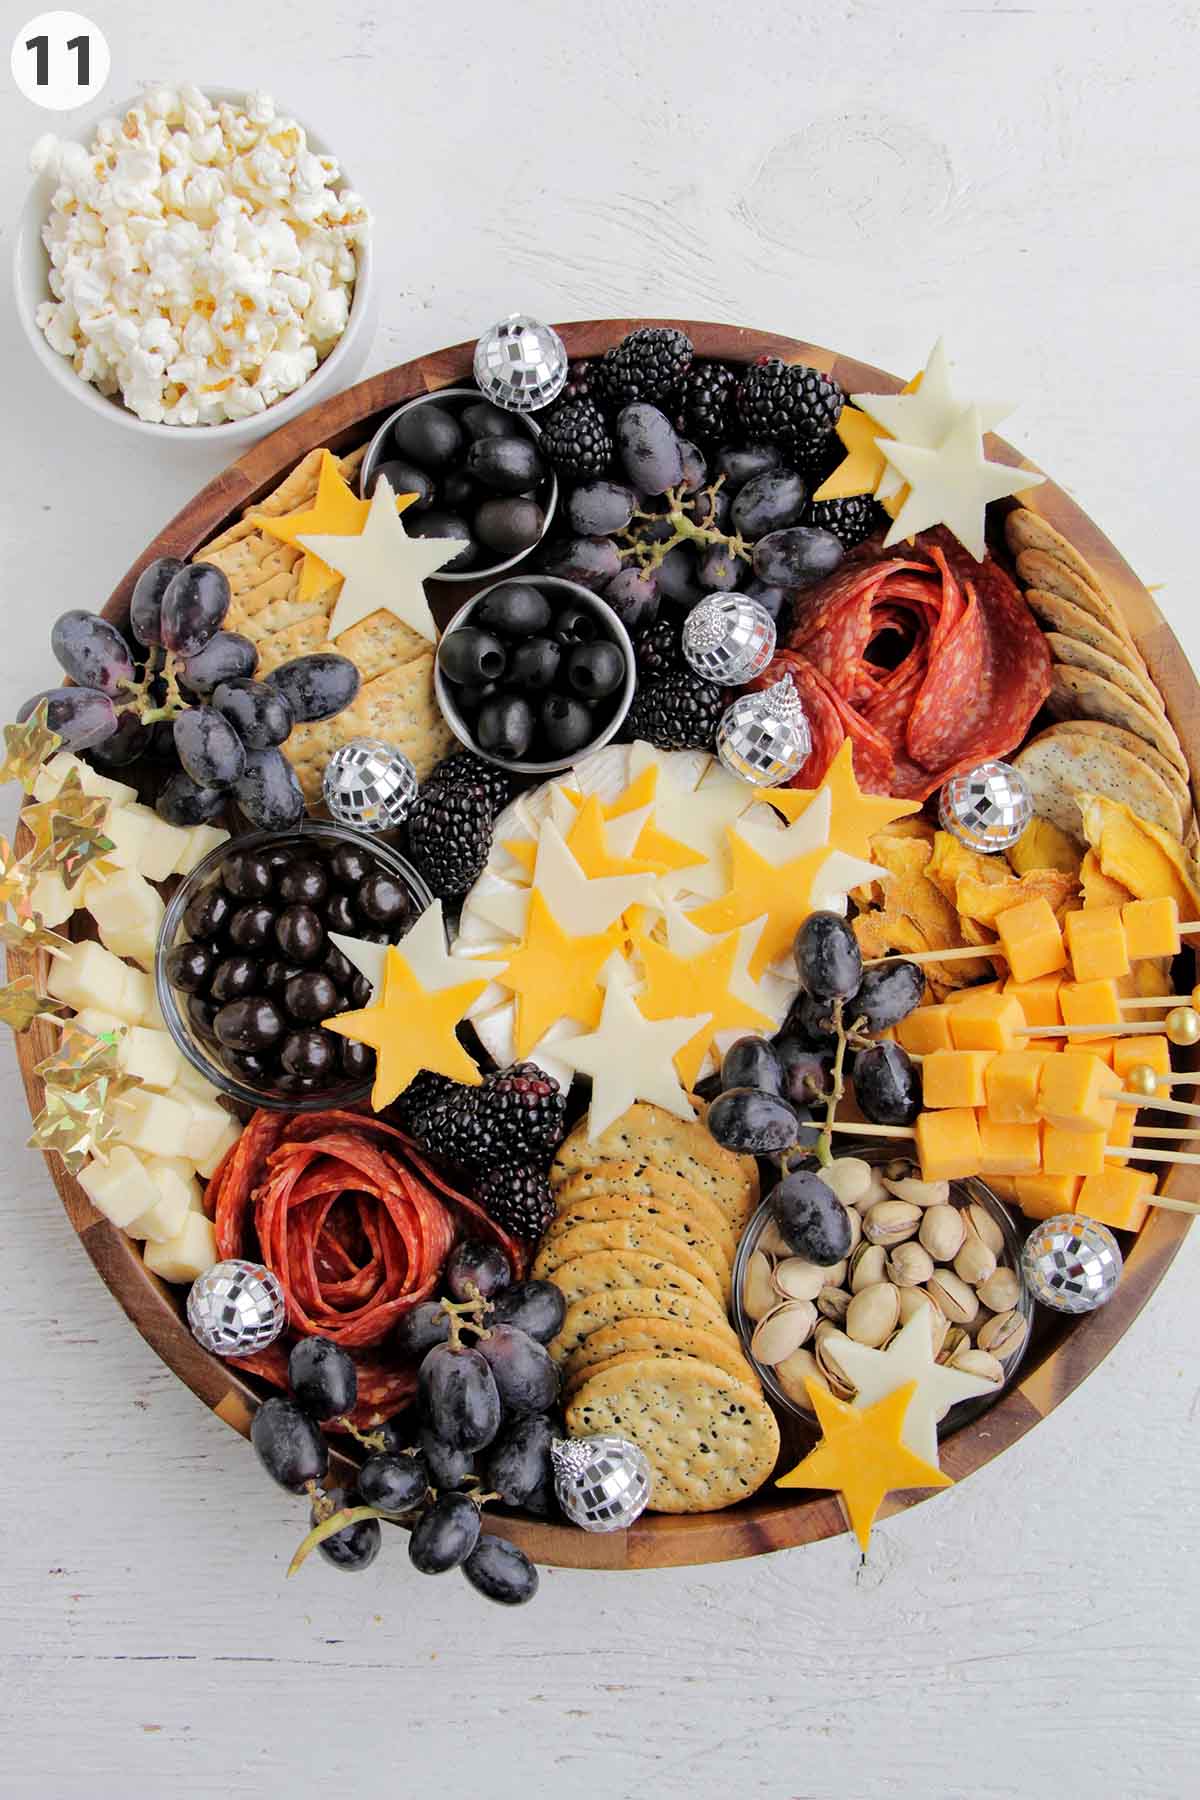 numbered photo showing how to garnish a cheese board with disco ball ornaments and star shaped cheese.